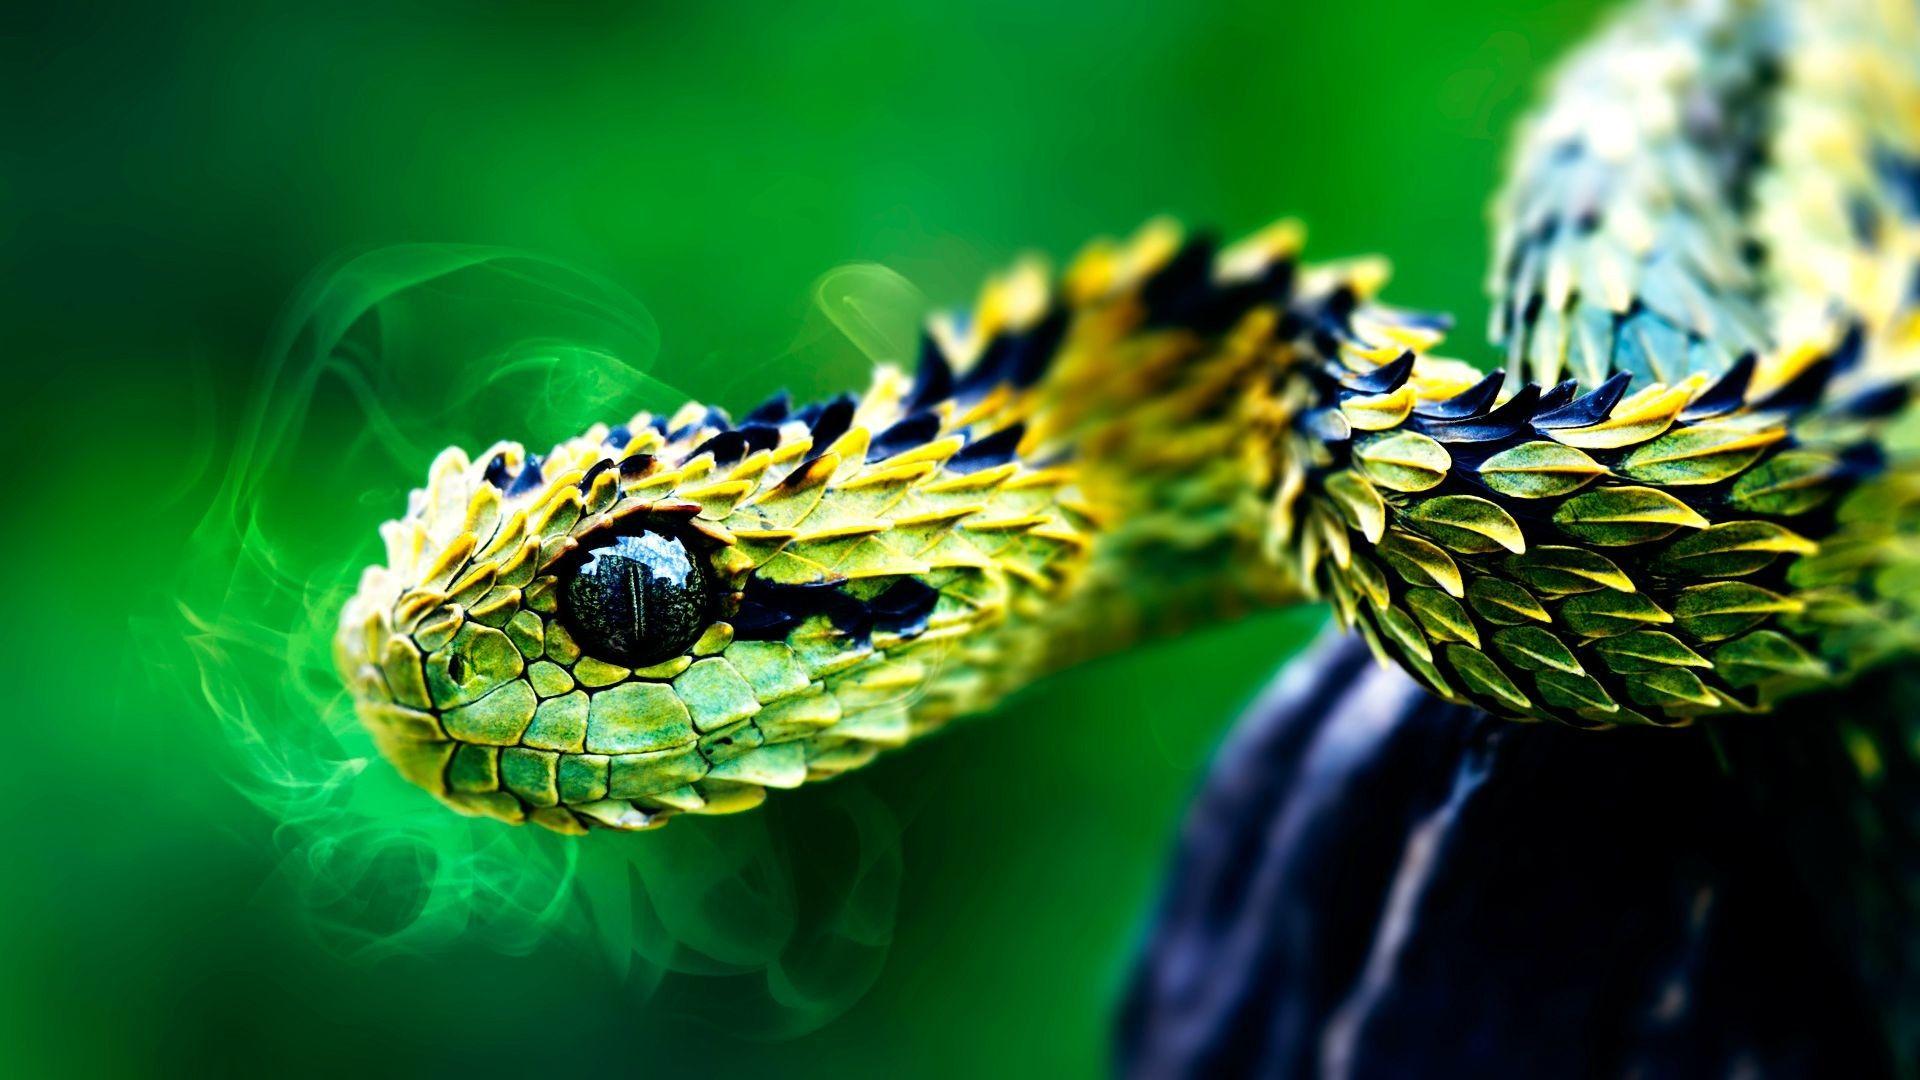 Snake Photos Download The BEST Free Snake Stock Photos  HD Images